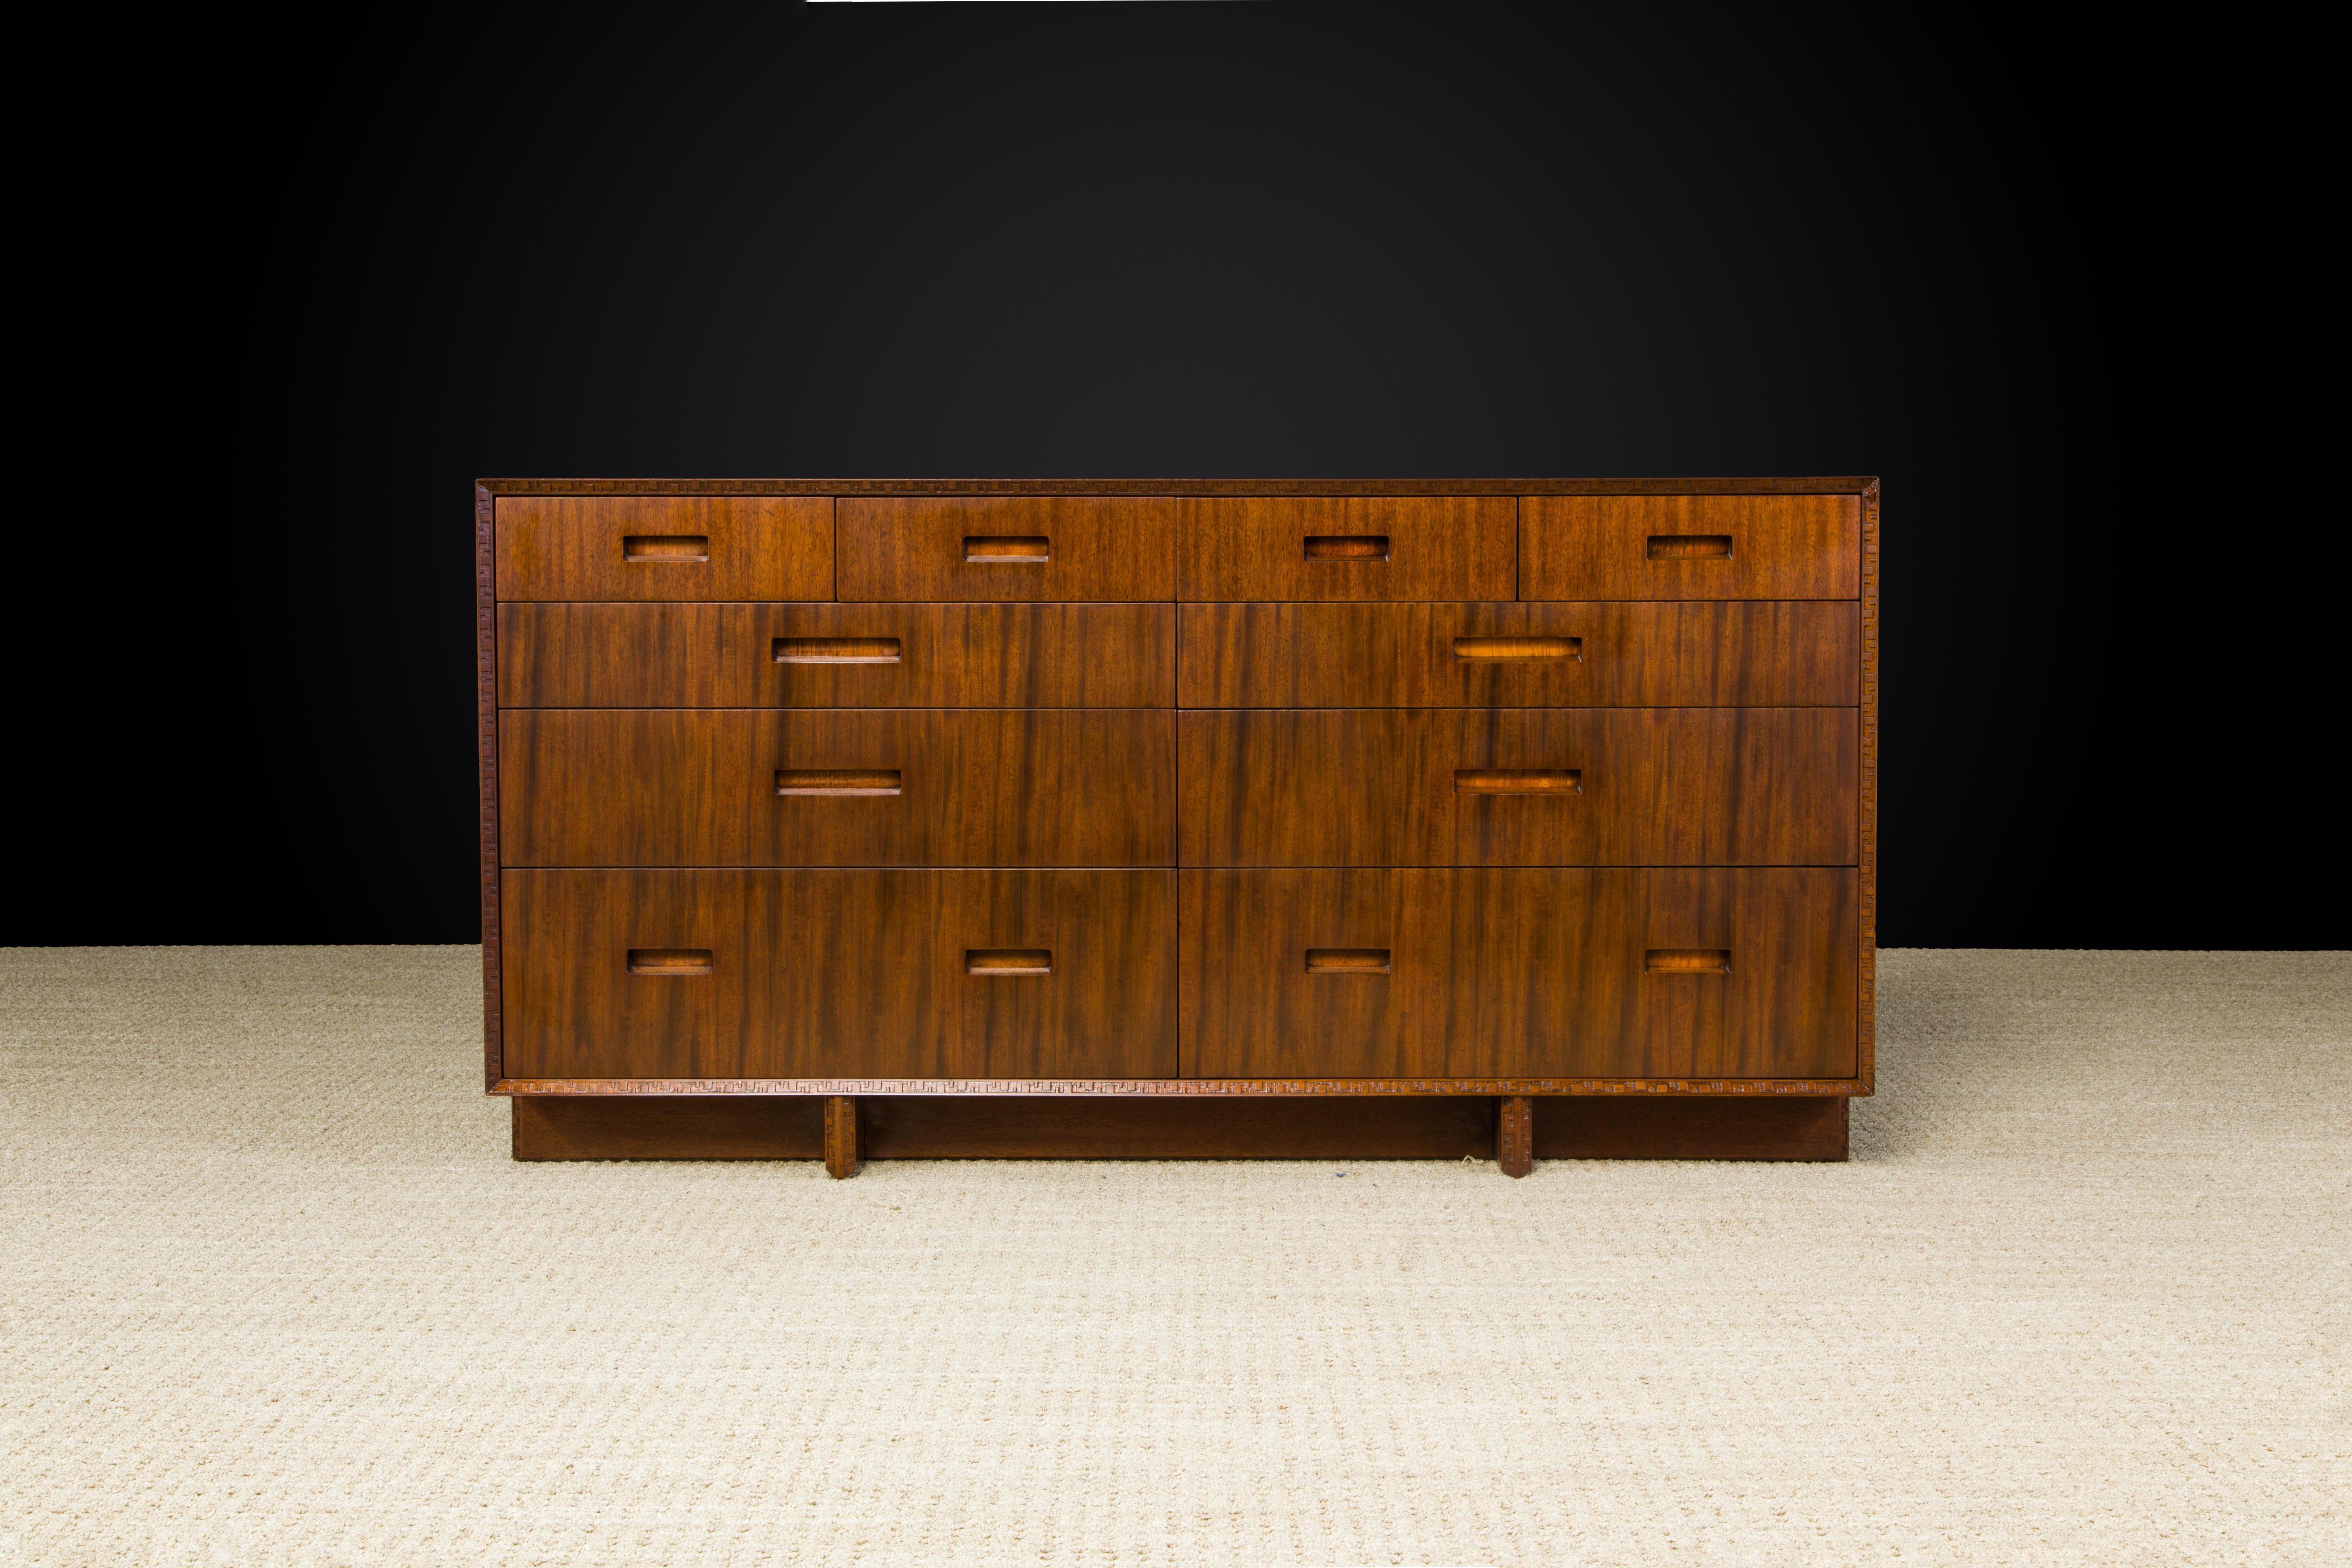 This gorgeously refinished Honduran Mahogany 'Taliesin' sideboard was designed by Frank Lloyd Wright for Heritage-Henredon in 1955 and produced only for two years, therefore is now a highly sought-after and rare collectors item. This example is